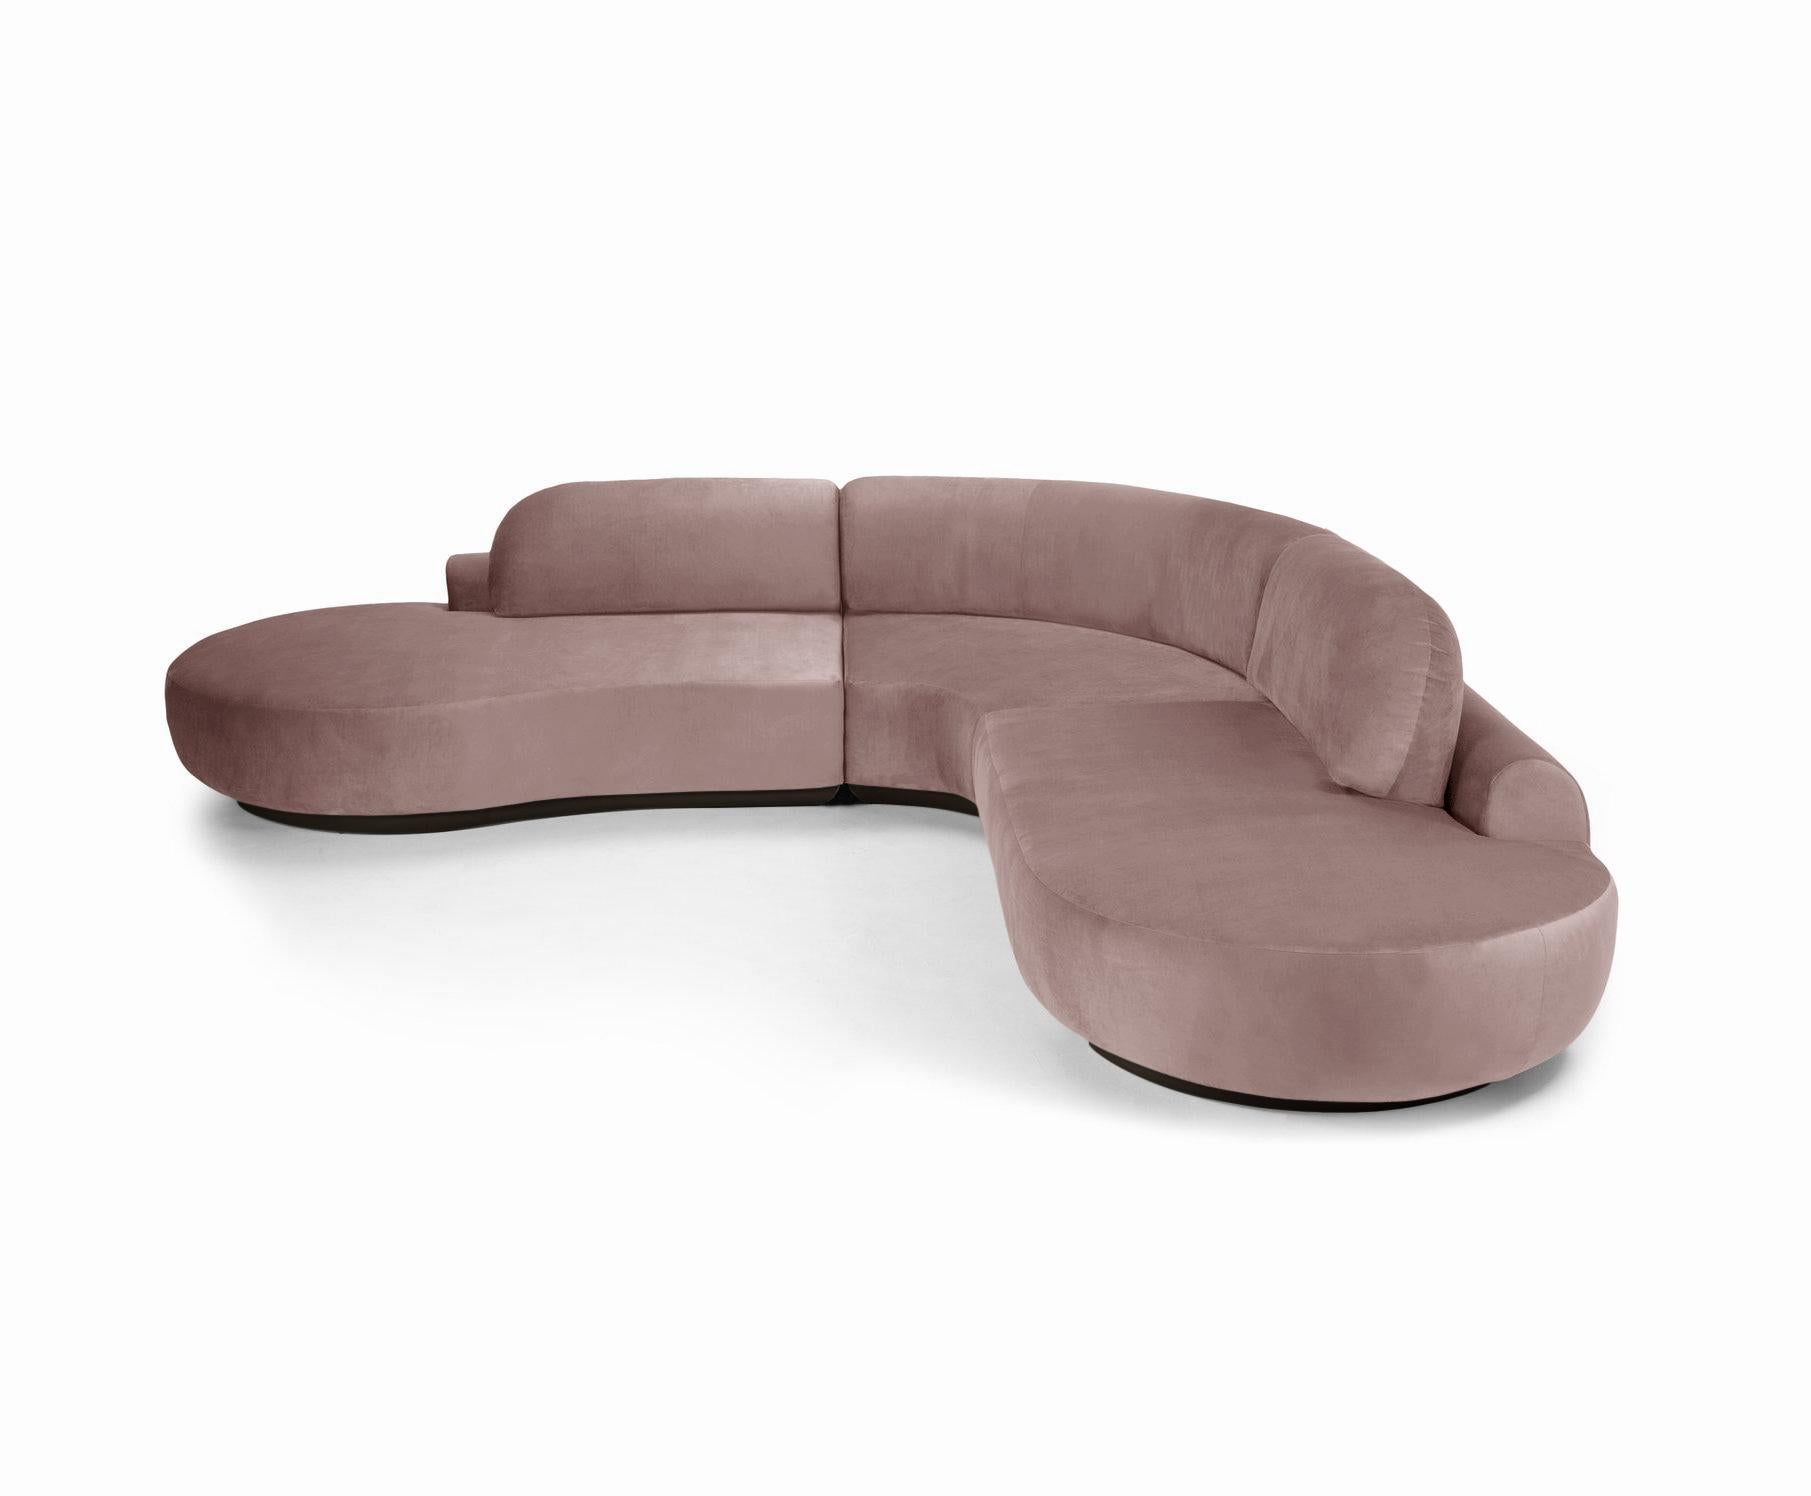 The naked sectional sofa is a modular sofa with inviting curves and a comfortable seating. Handmade with a solid wood base. The naked sectional sofa is available in a number of different materials, finishes and combinations.

Material

Top :